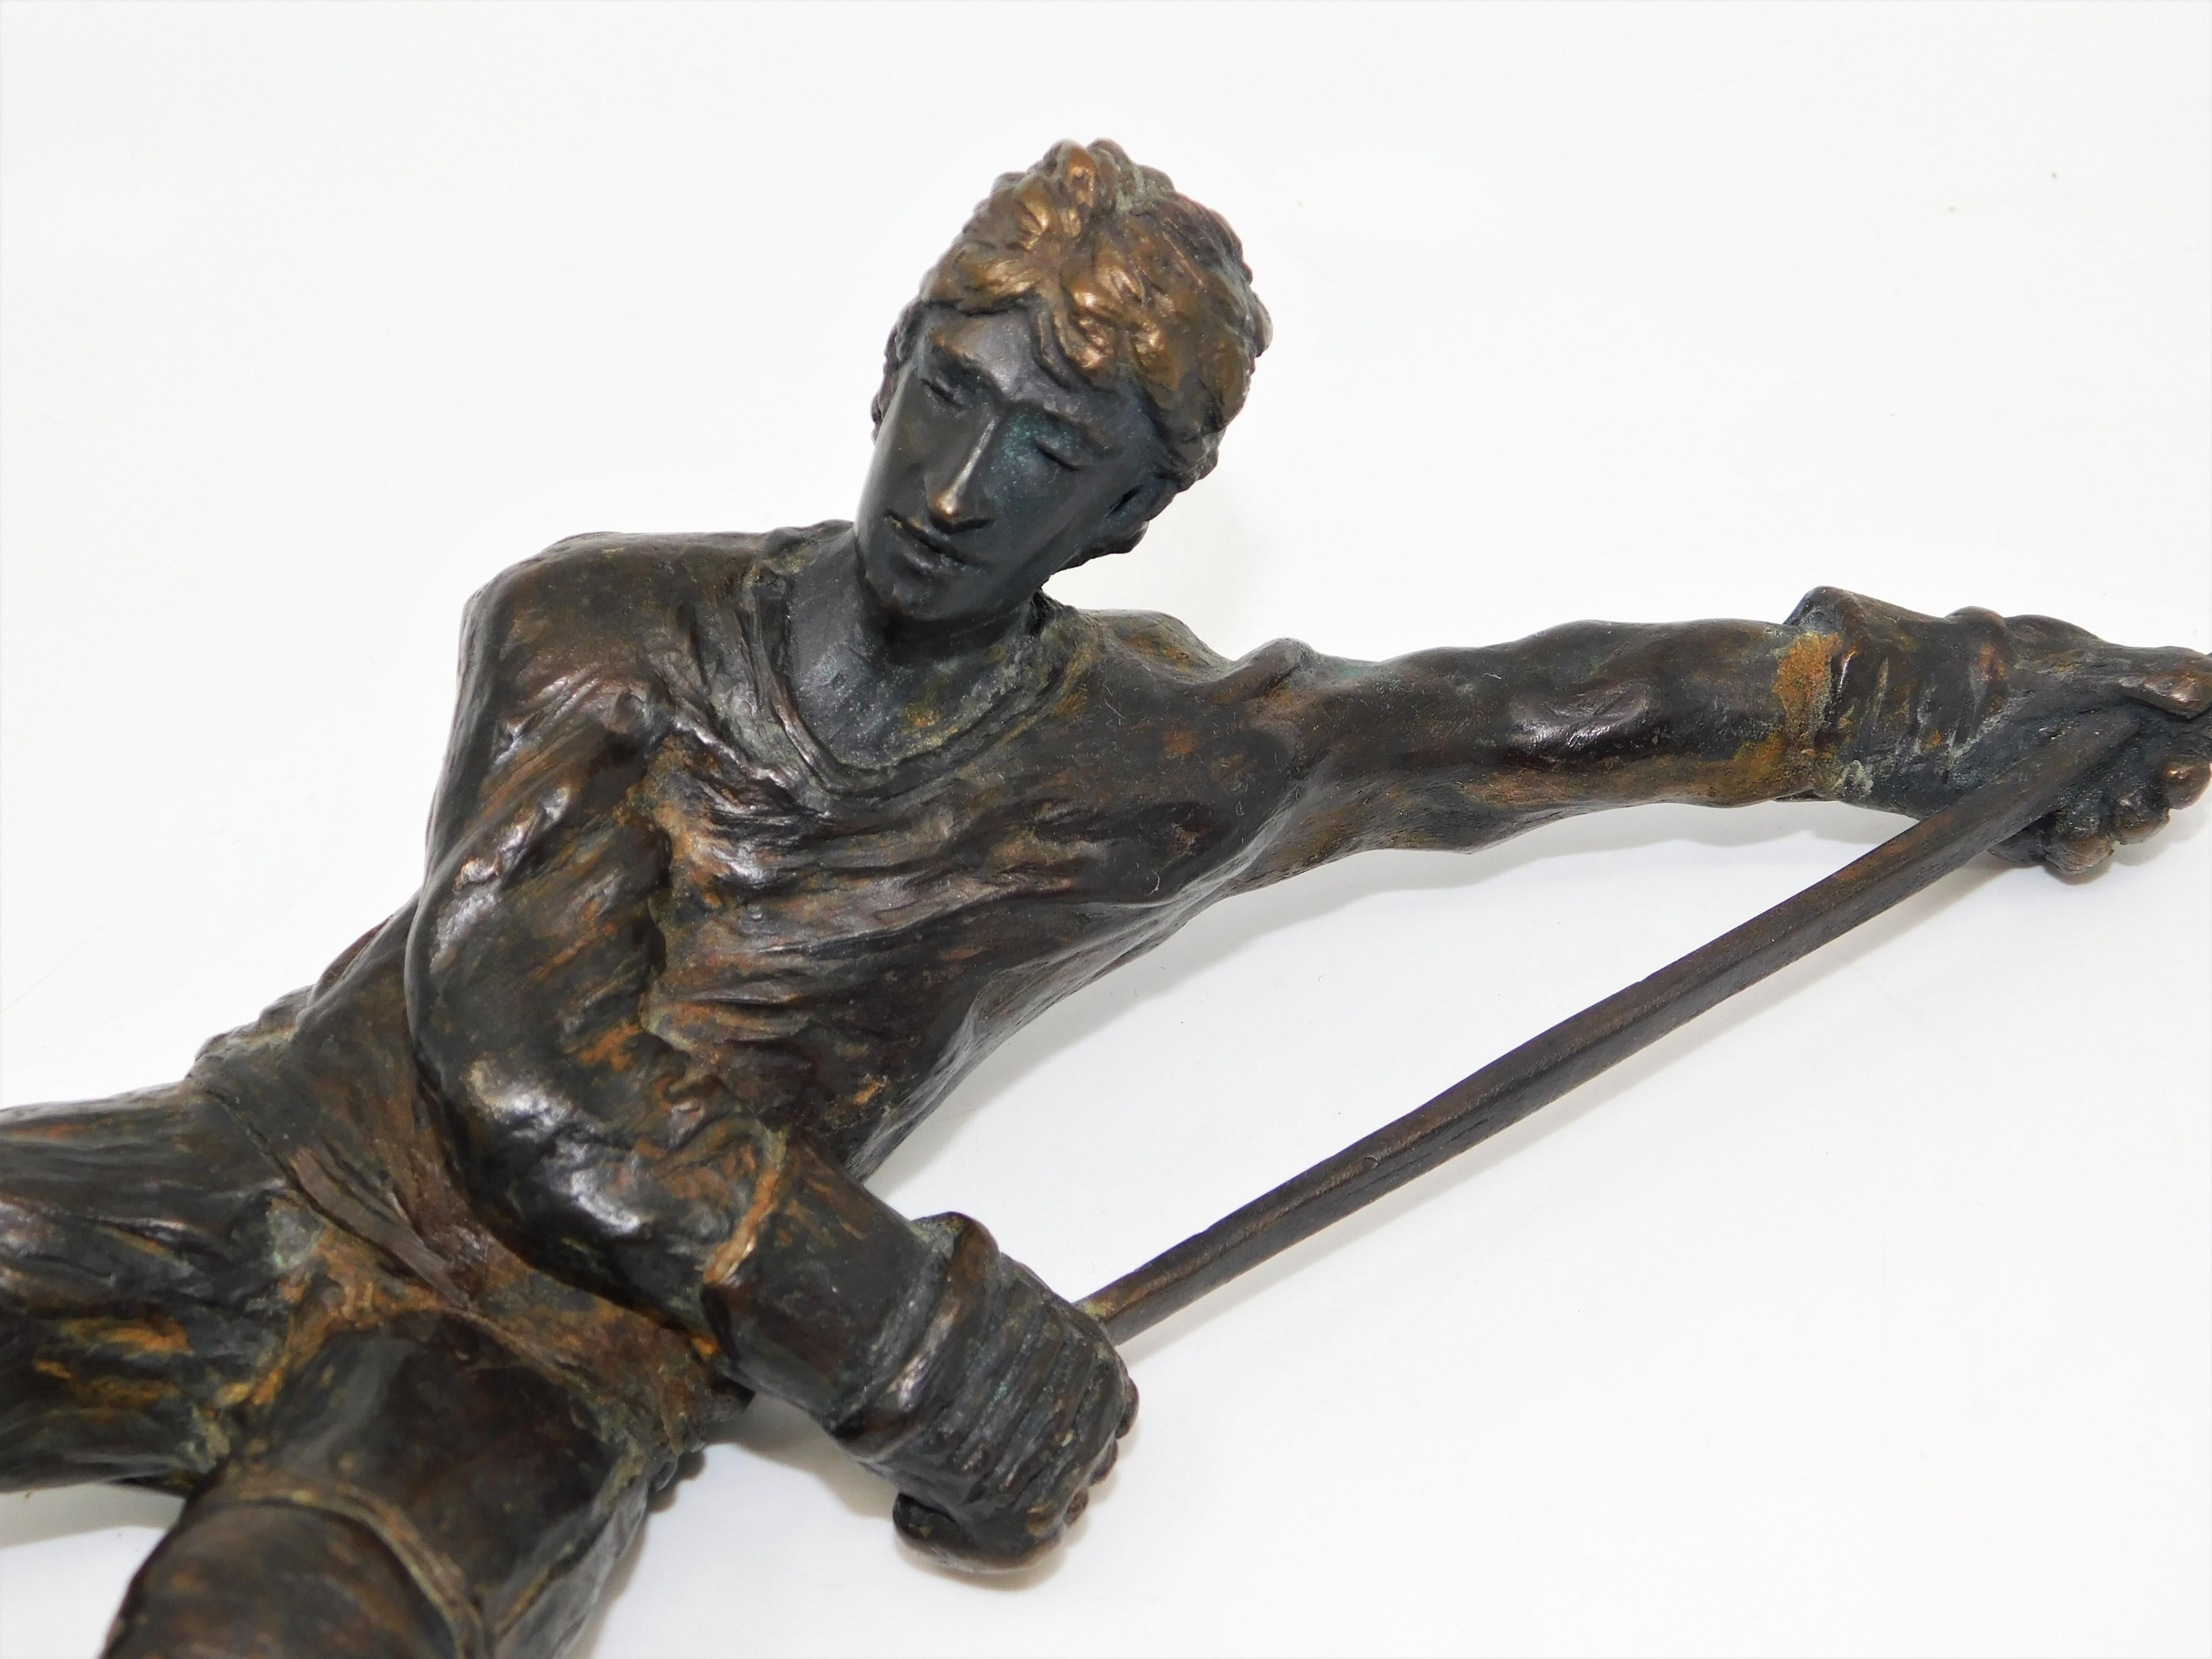 Canadian Wayne Gretzky 1985 Limited-Edition Hand Sculpted Bronze Statue #20/200